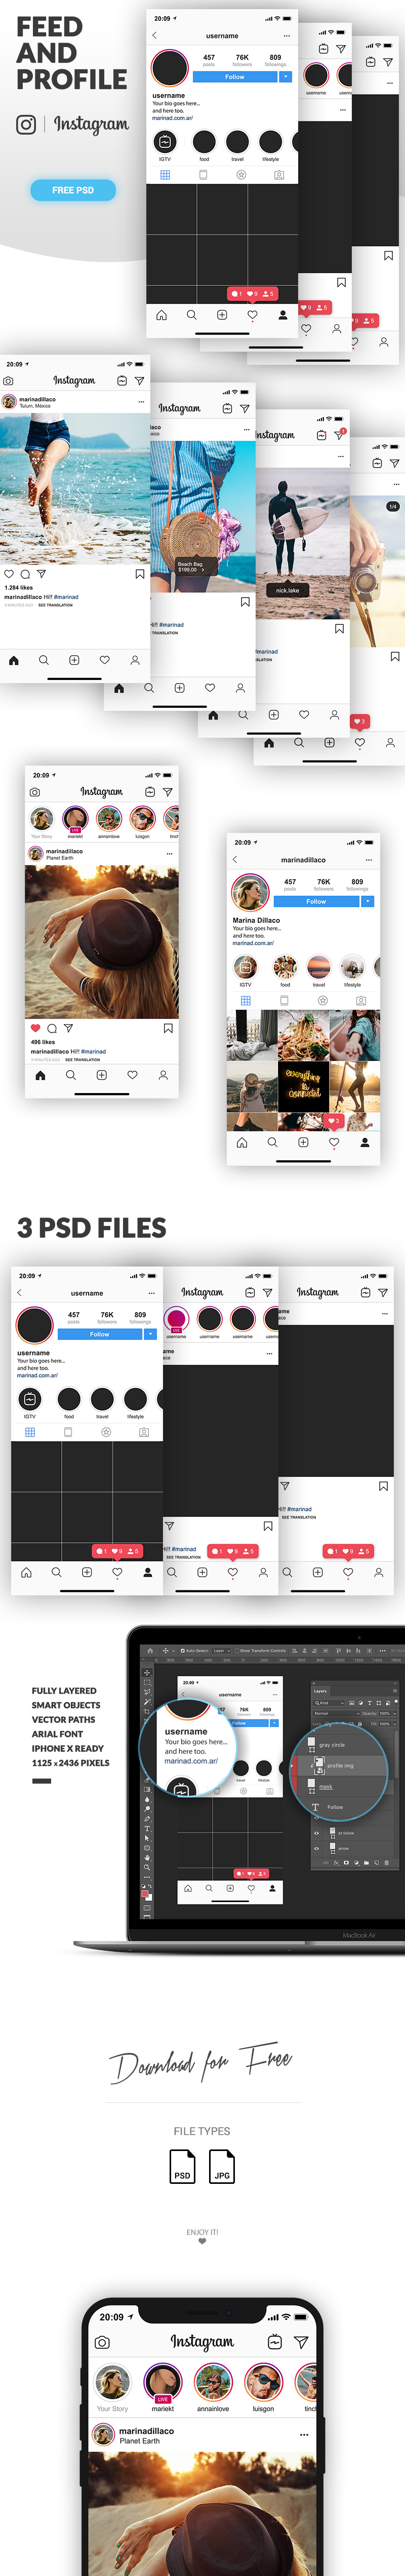 FREE Instagram Feed and Profile PSD UI – 2019 – MarinaD